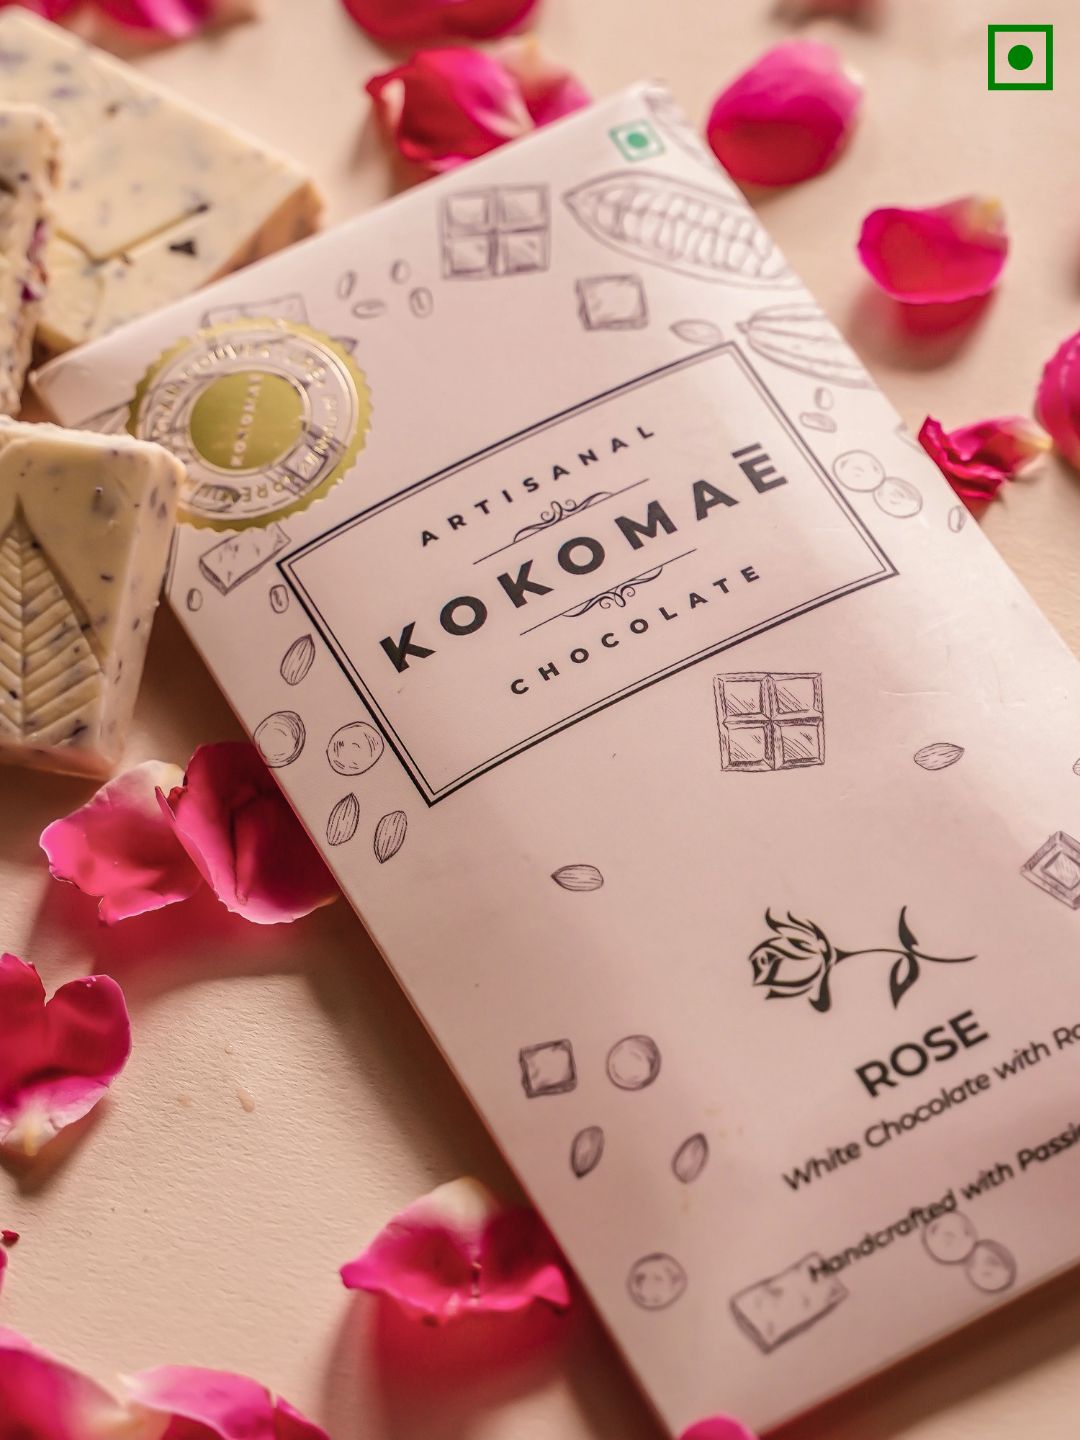 Kokomaē Chocolate Gift Hamper with Premium Belgian Couverture Pack of Five Exquisite Flavors Handmade with Natural & Premium Ingredients